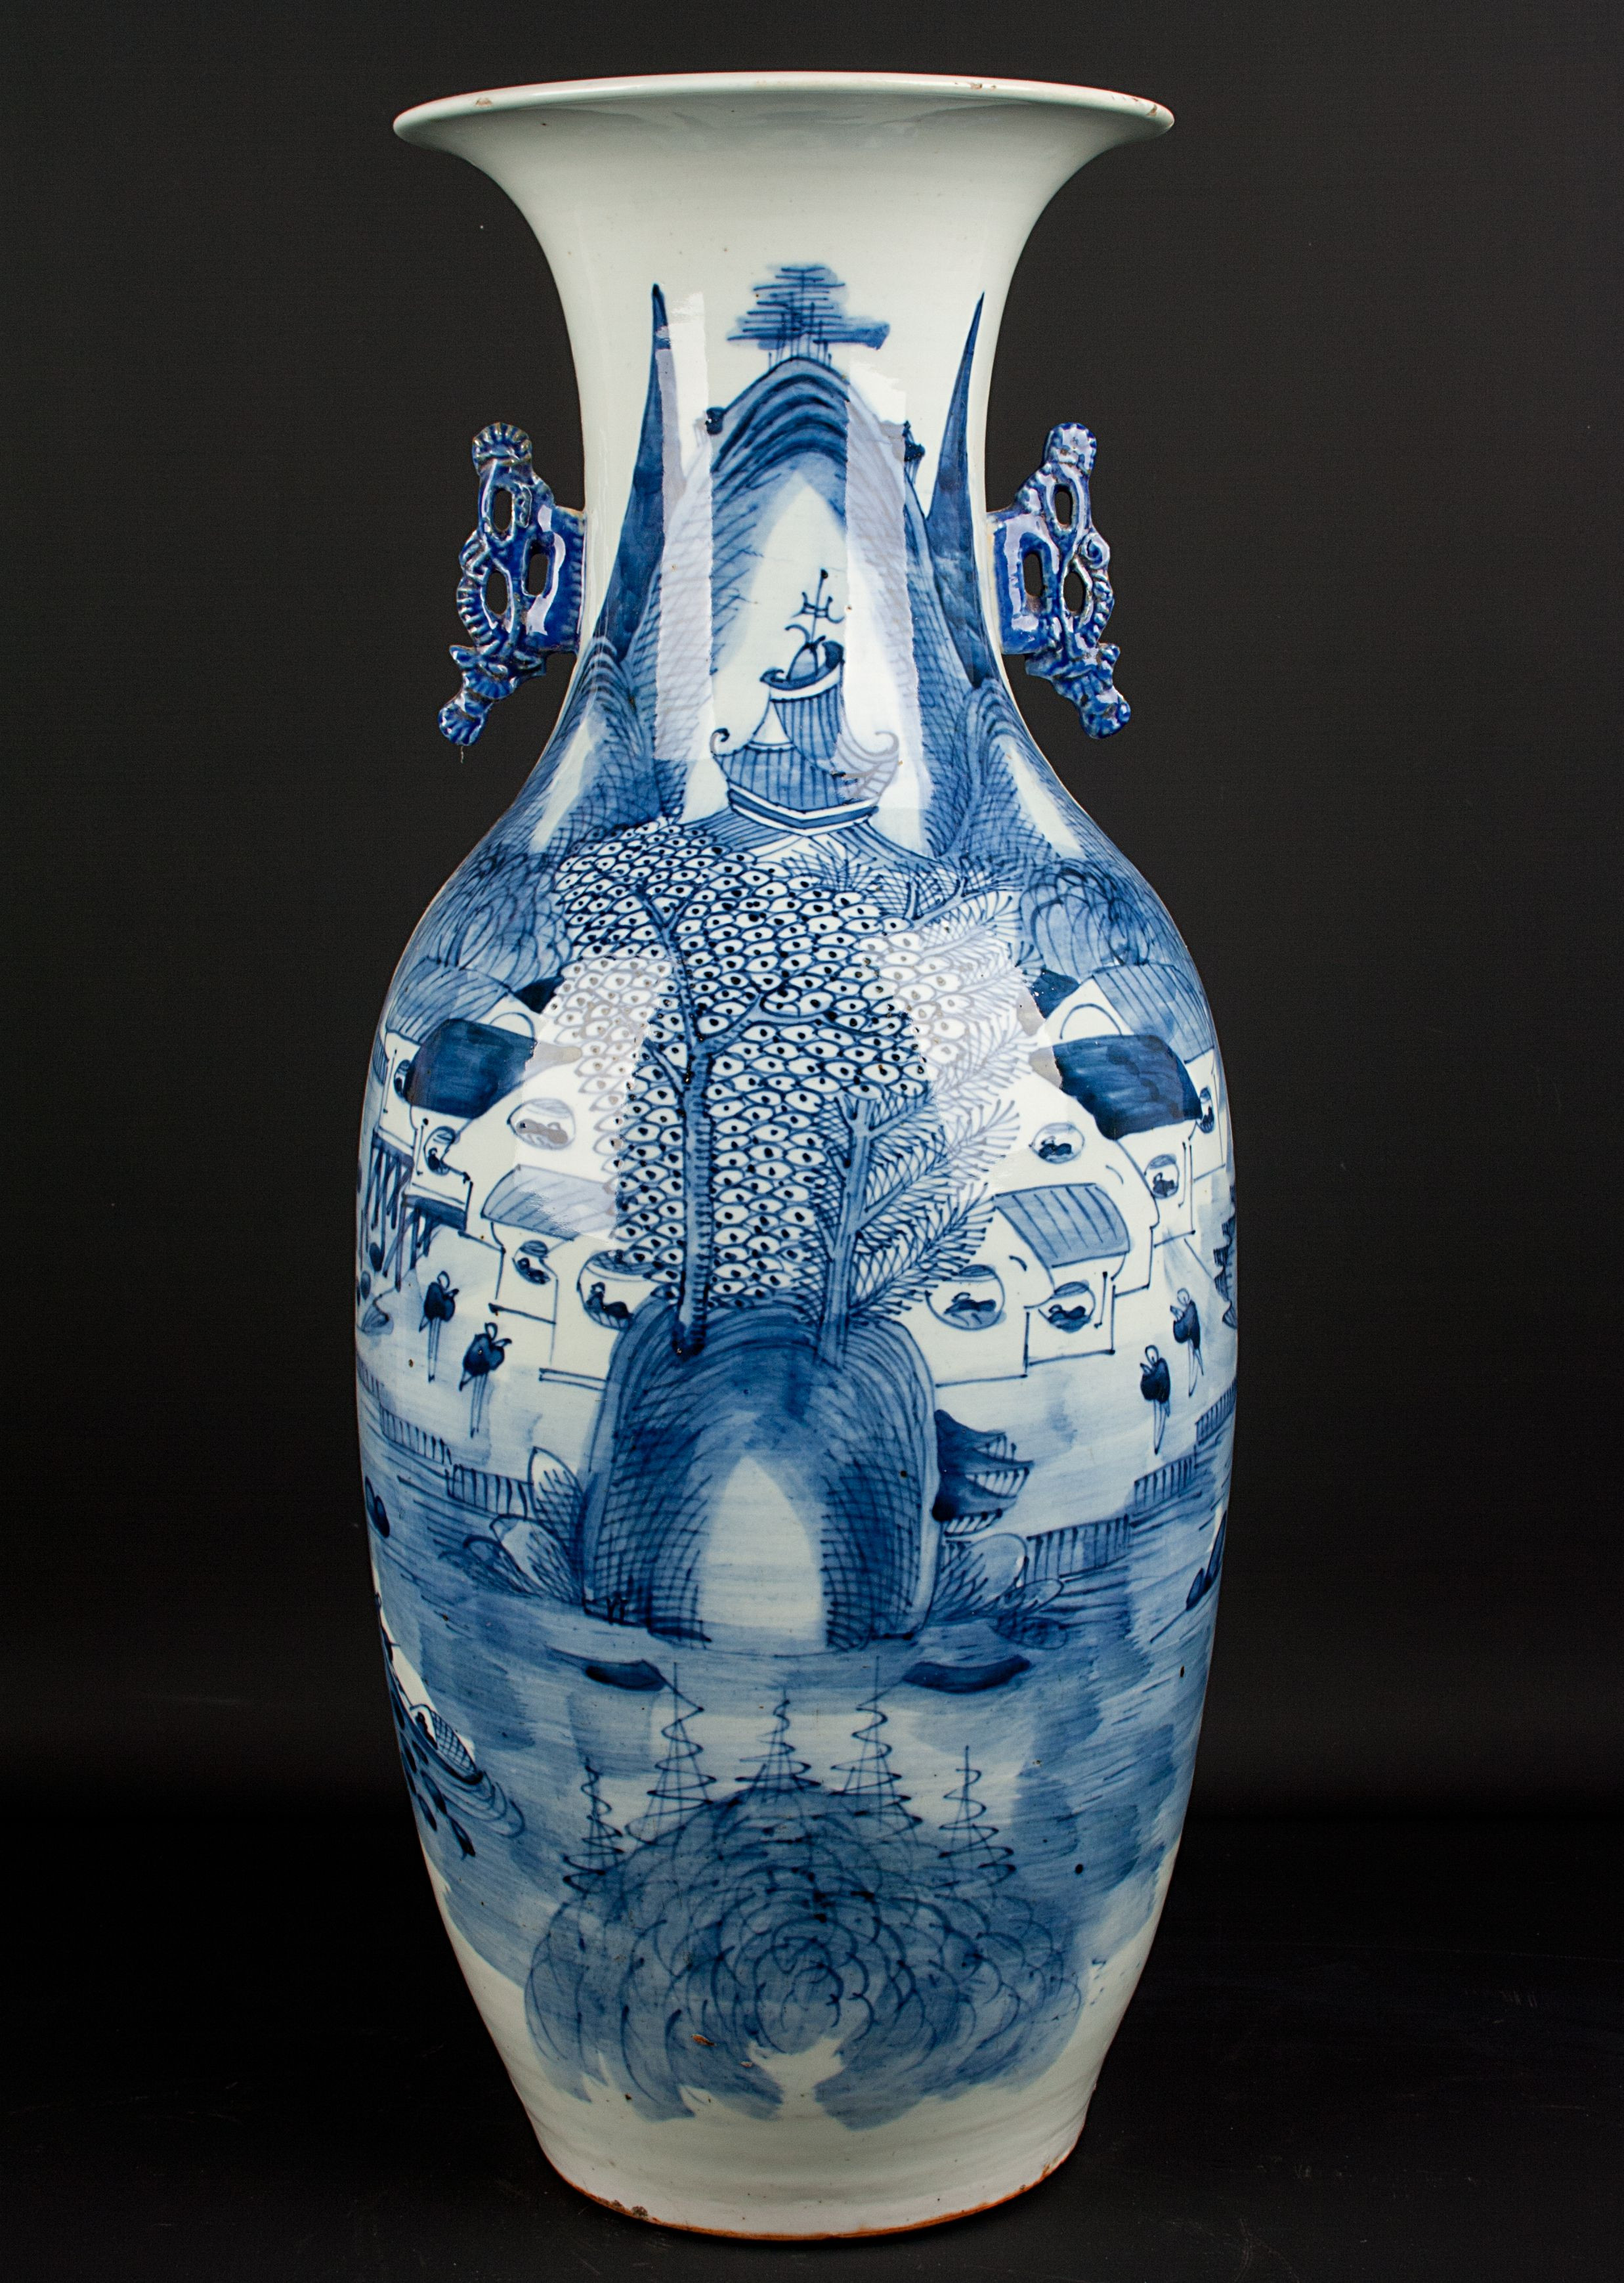 Qianlong Emperor Vase Of Description A Chinese Blue and White Baluster Vase the Flared Mouth with Regard to Description A Chinese Blue and White Baluster Vase the Flared Mouth Over butterfly Shaped Pierced Handles the Shoulders and Sides Decorated with